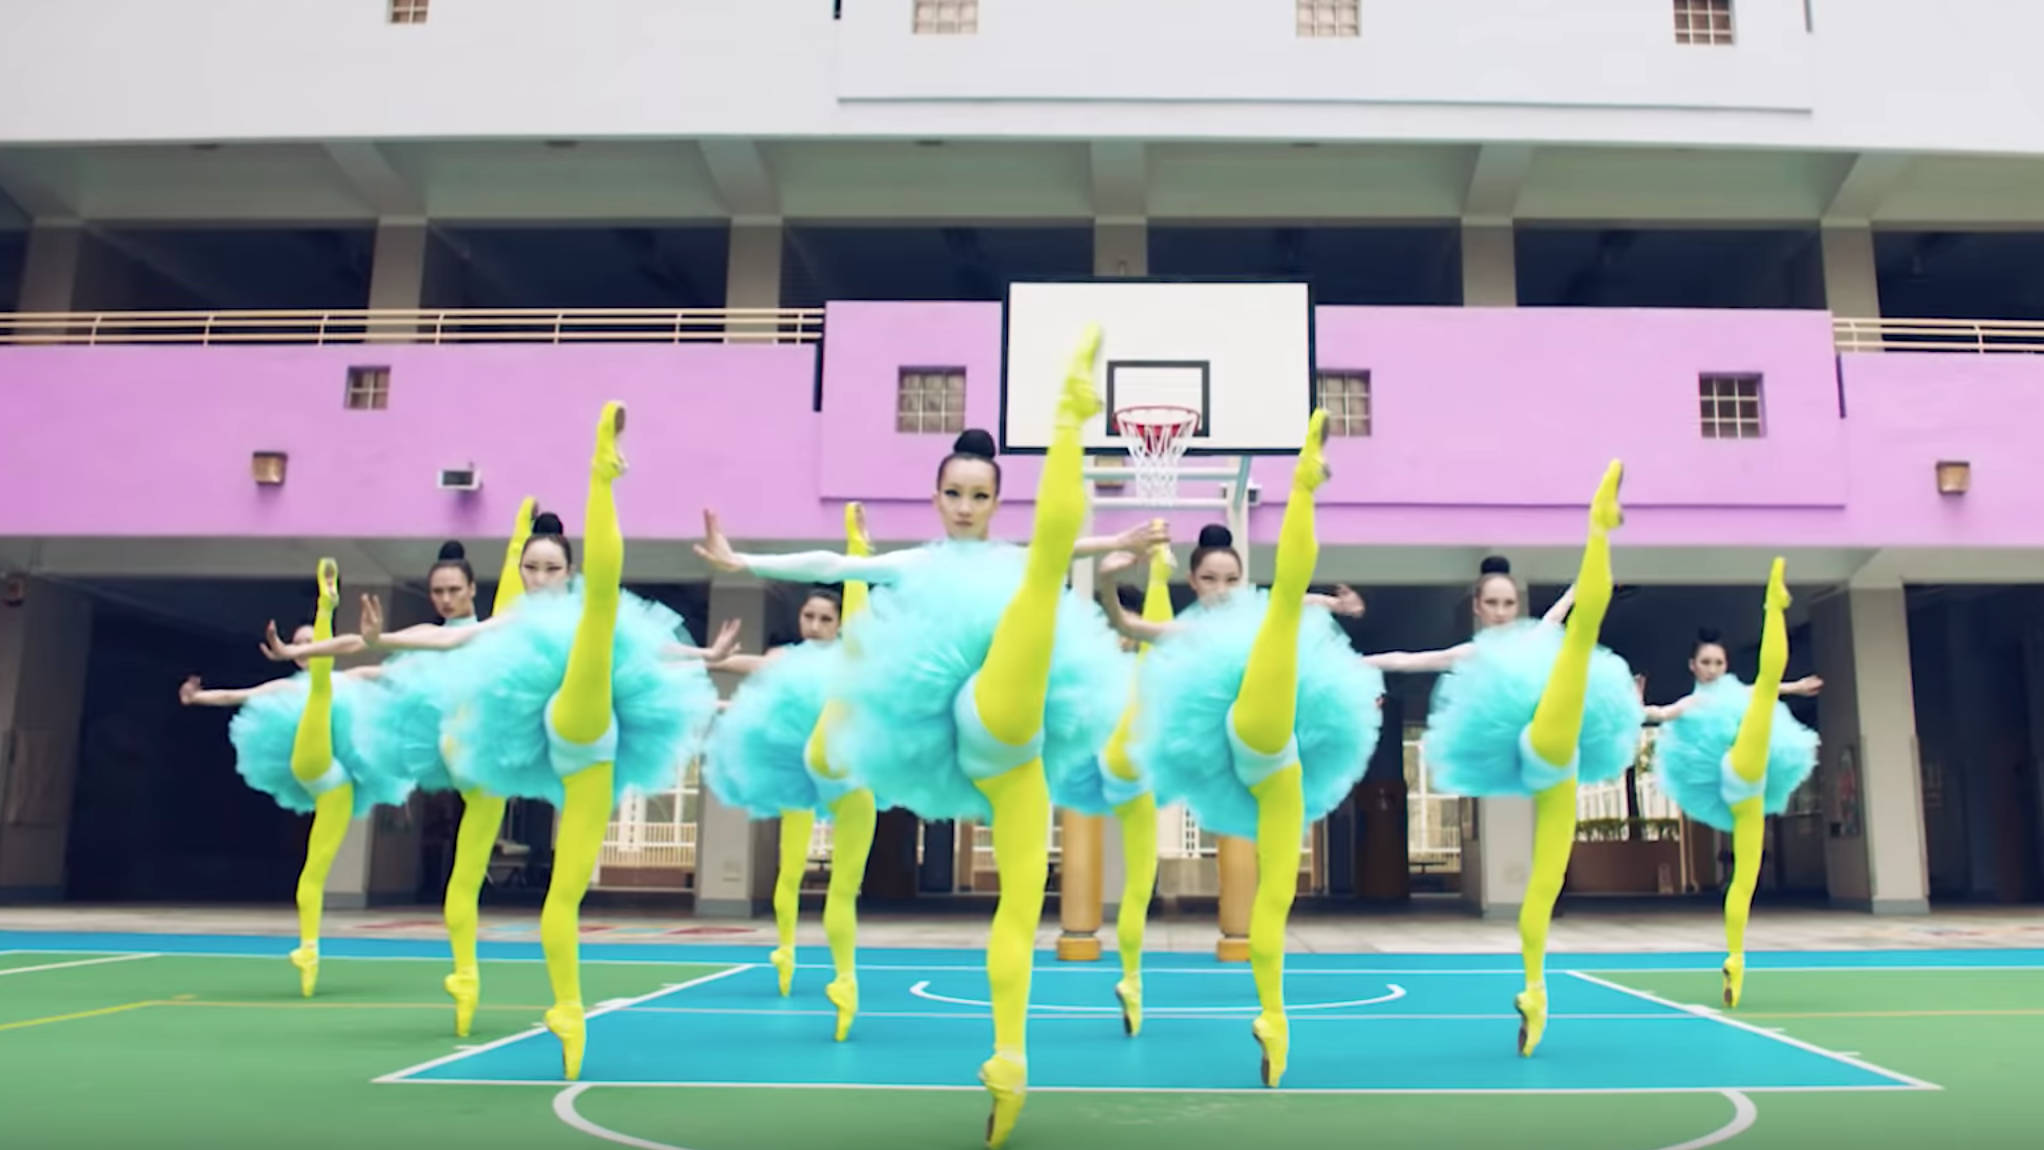 This Stunning Video Will Challenge All Your Preconceptions About